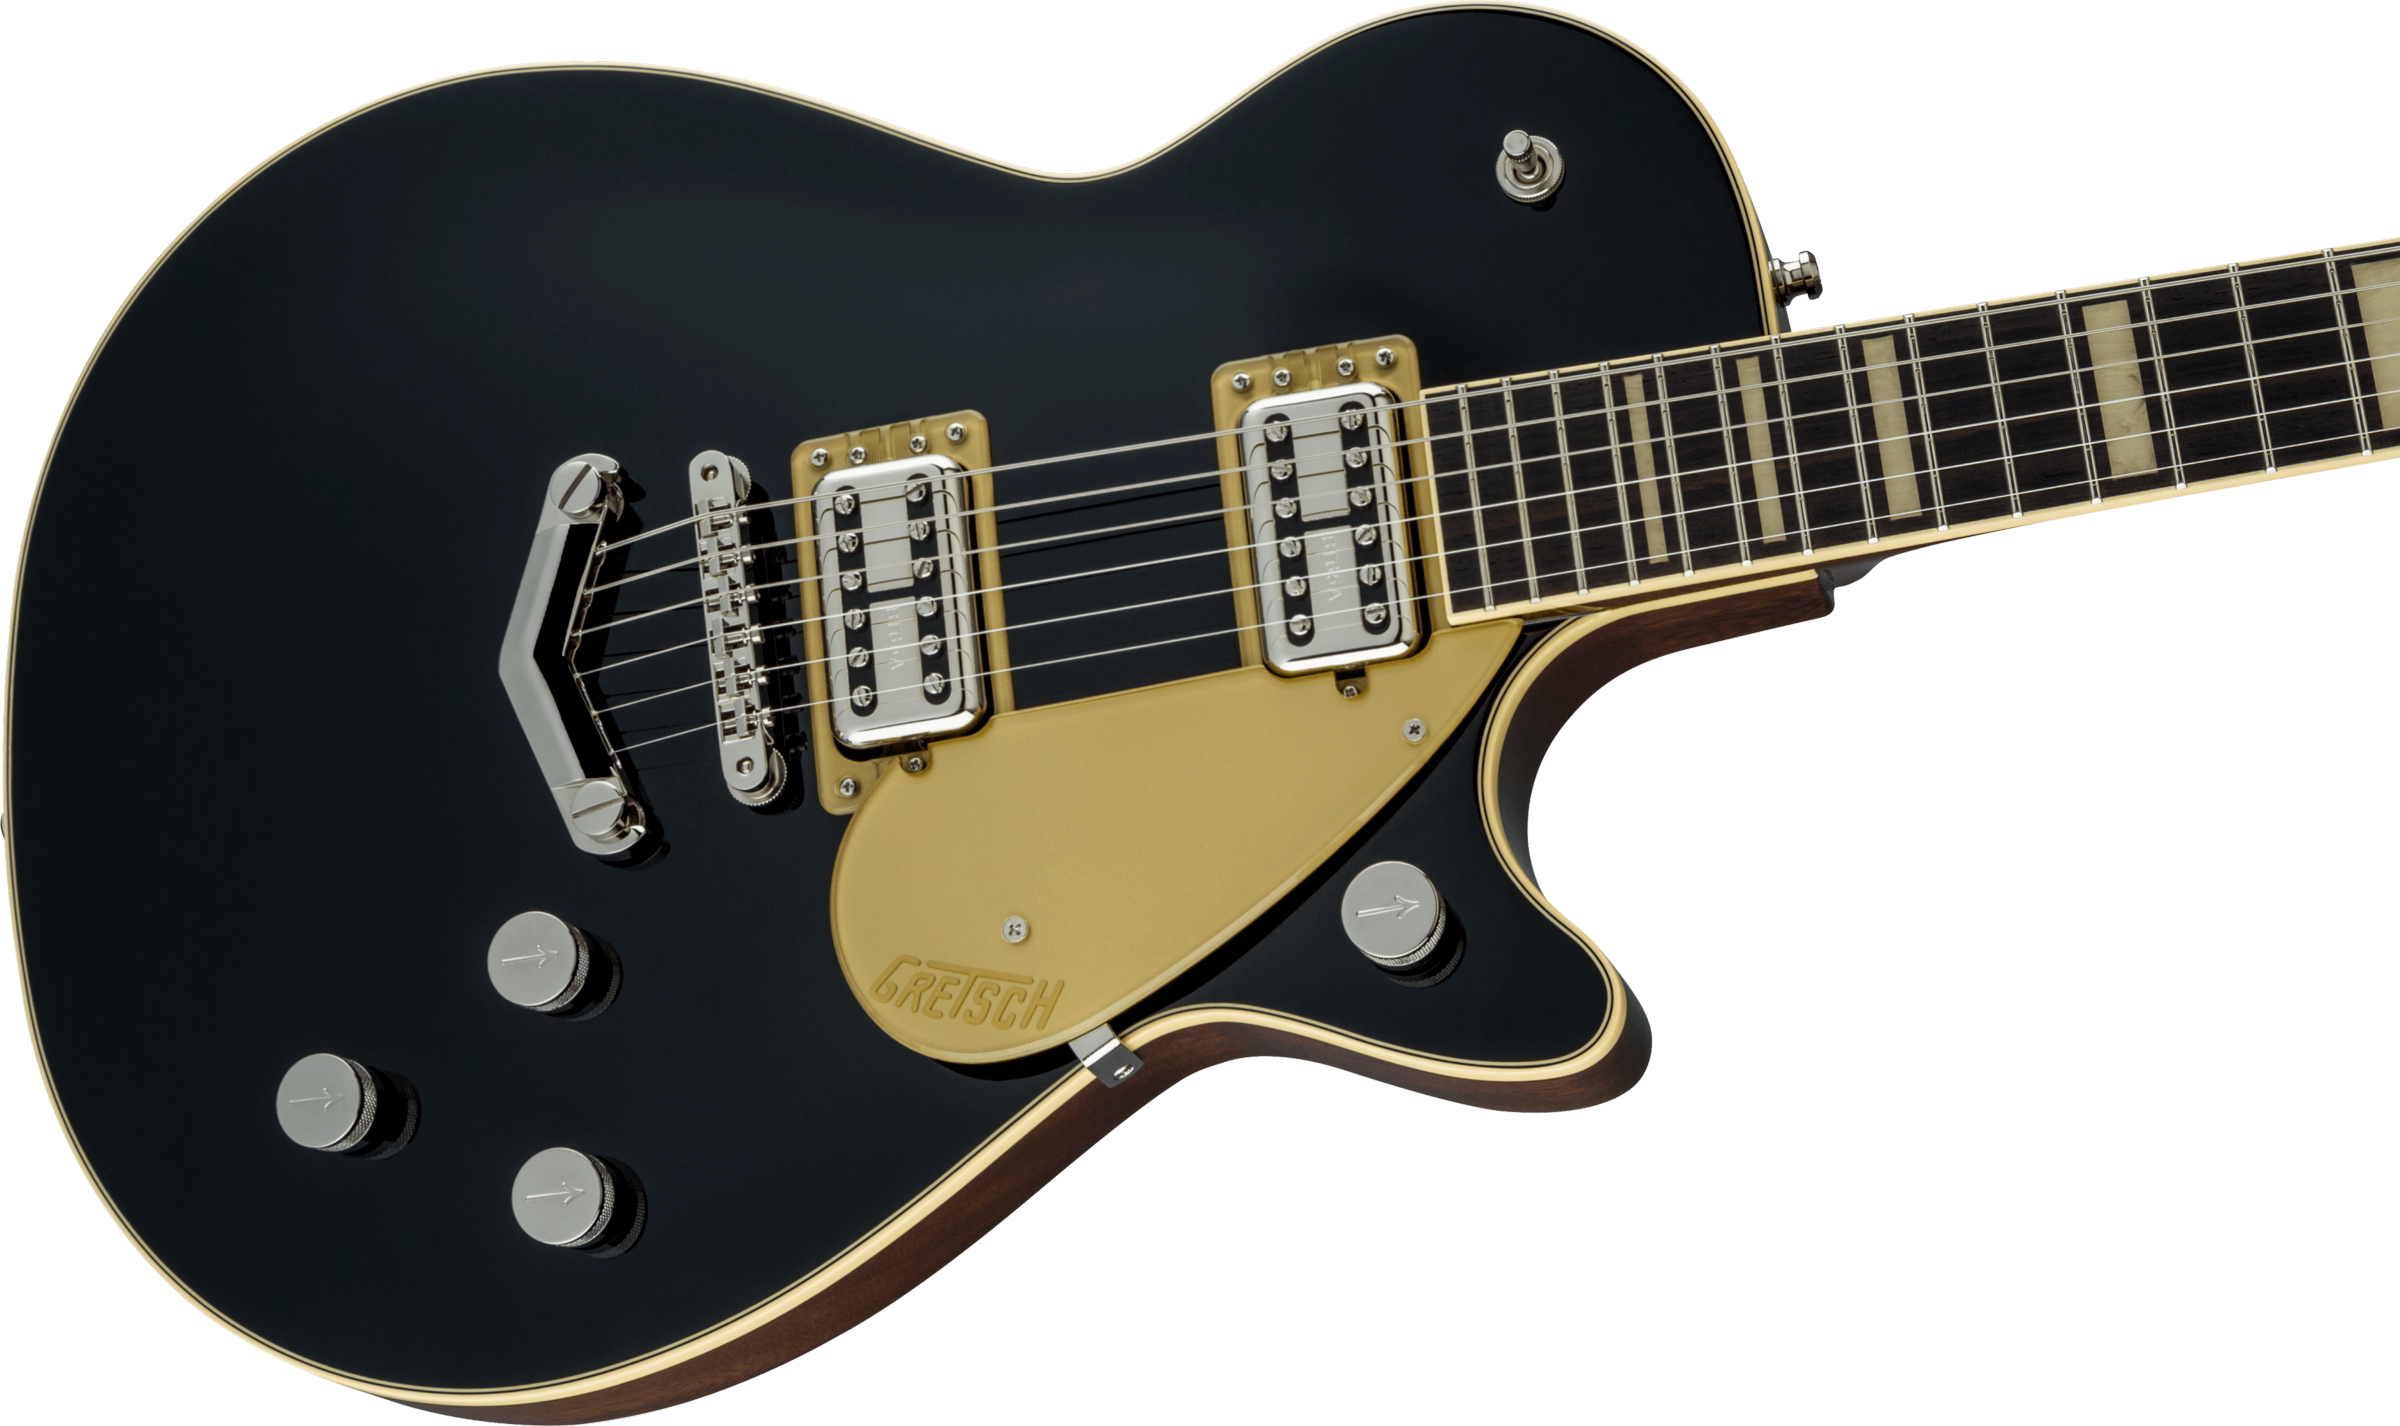 G6228 Players Edition Jet BT with V-Stoptail, Rosewood Fingerboard, Black追加画像